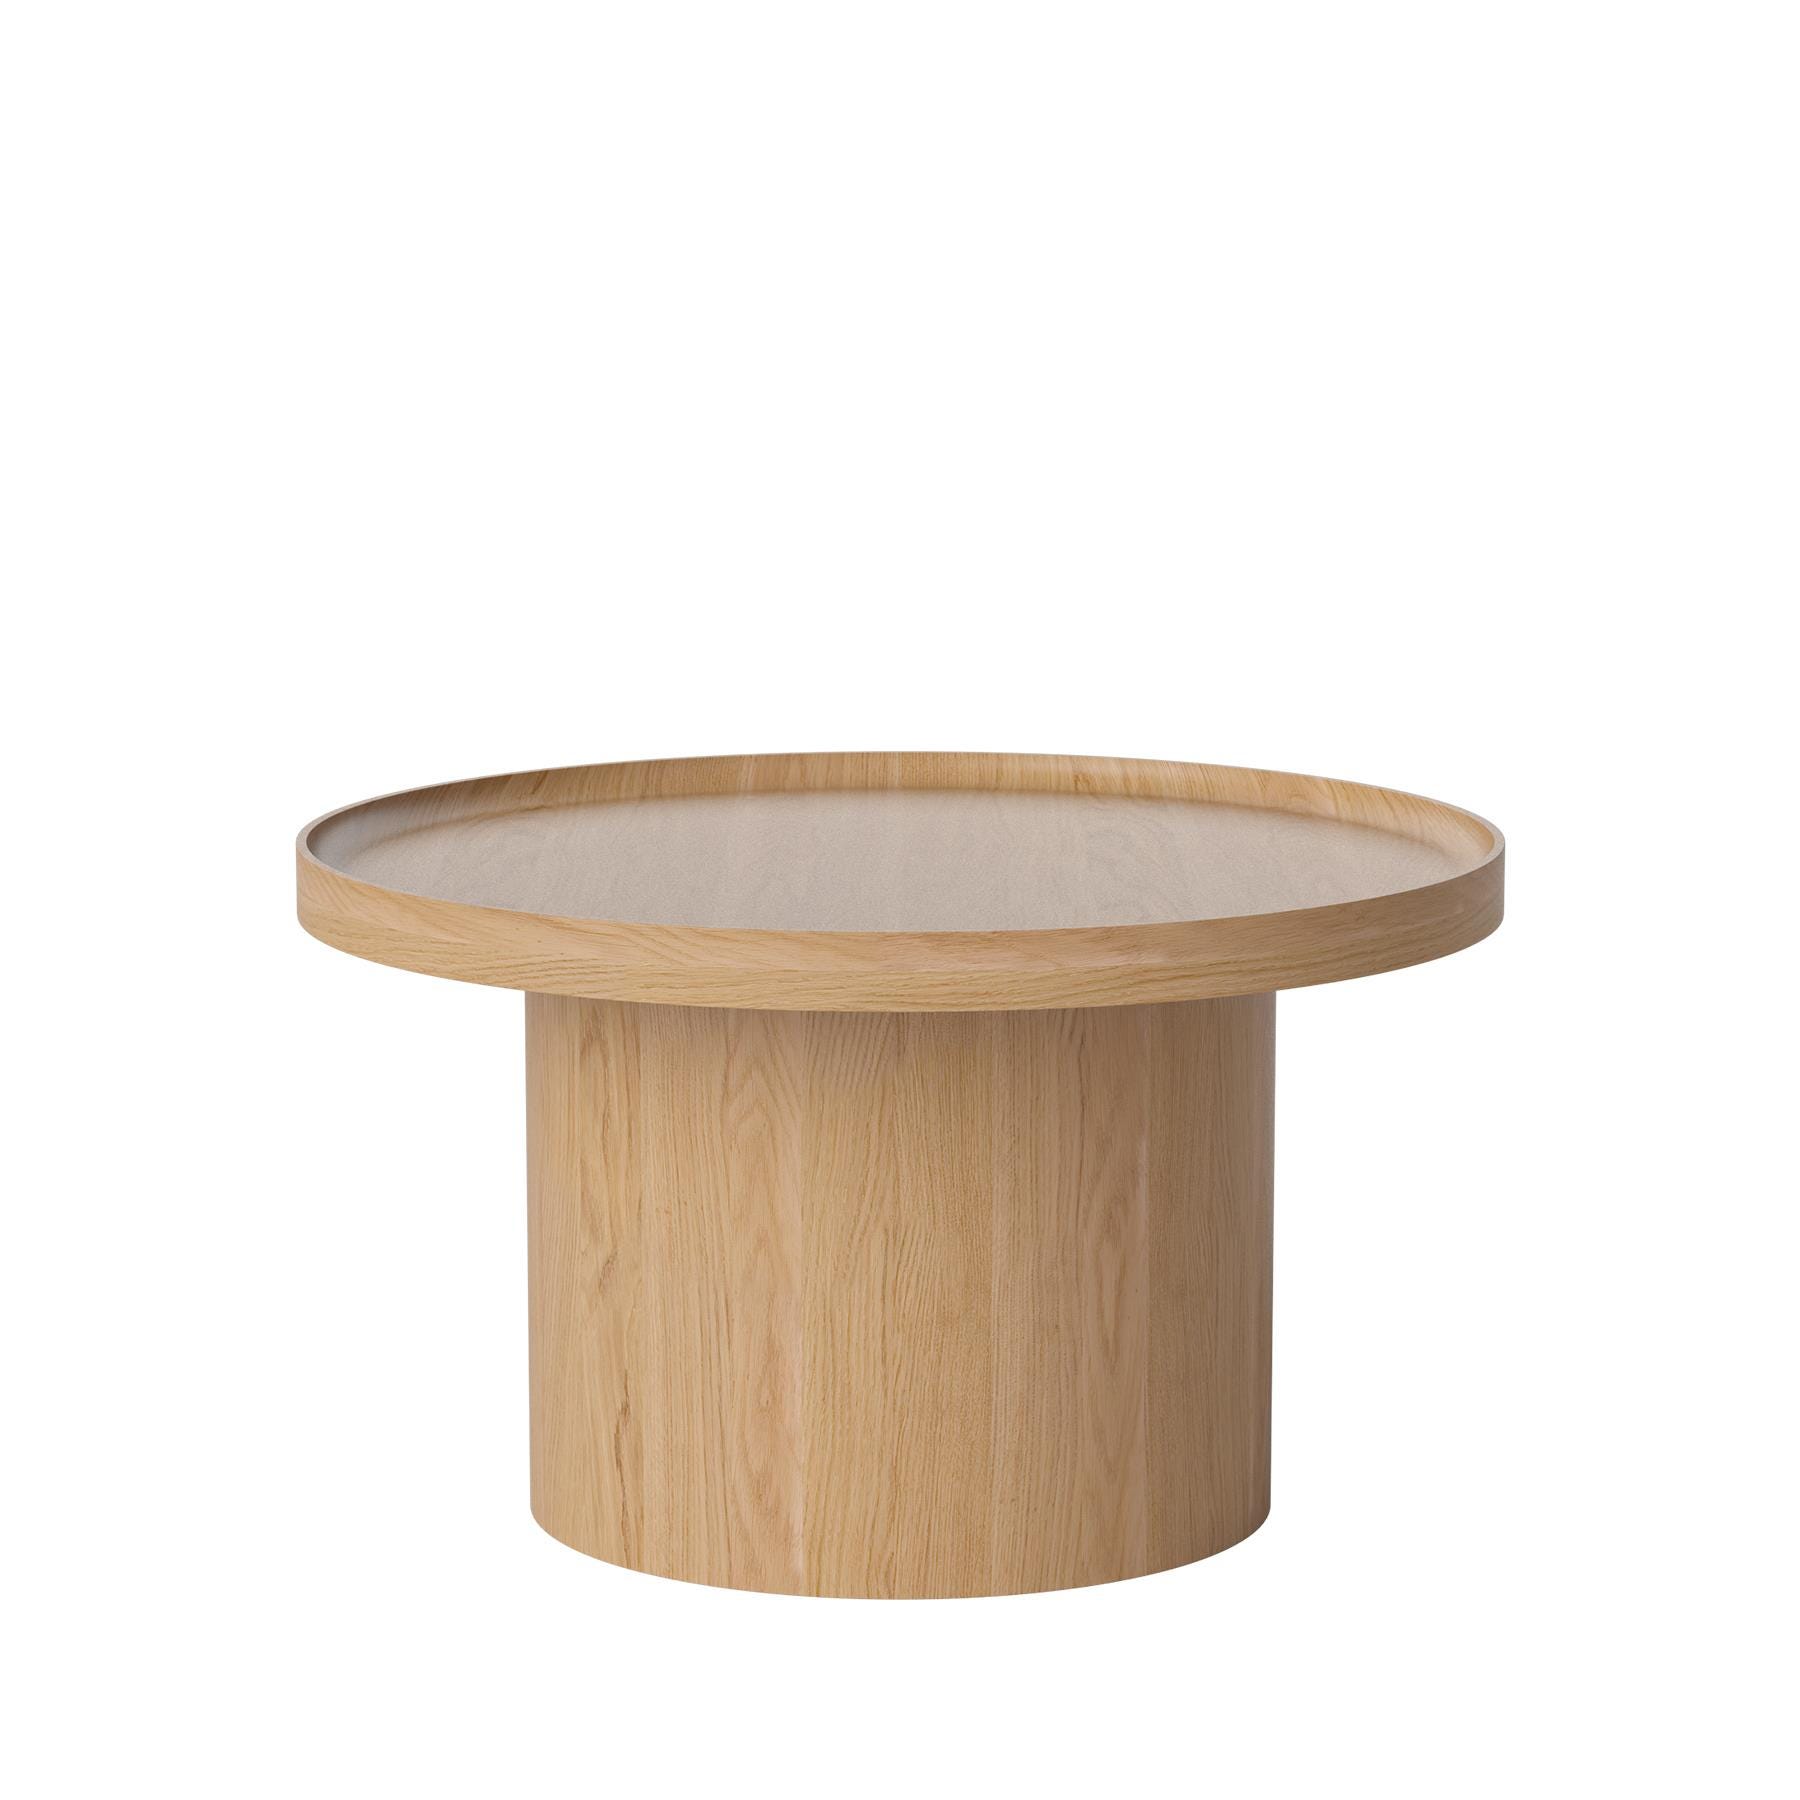 Bolia Plateau Coffee Table Large Lacquered Oak Light Wood Designer Furniture From Holloways Of Ludlow